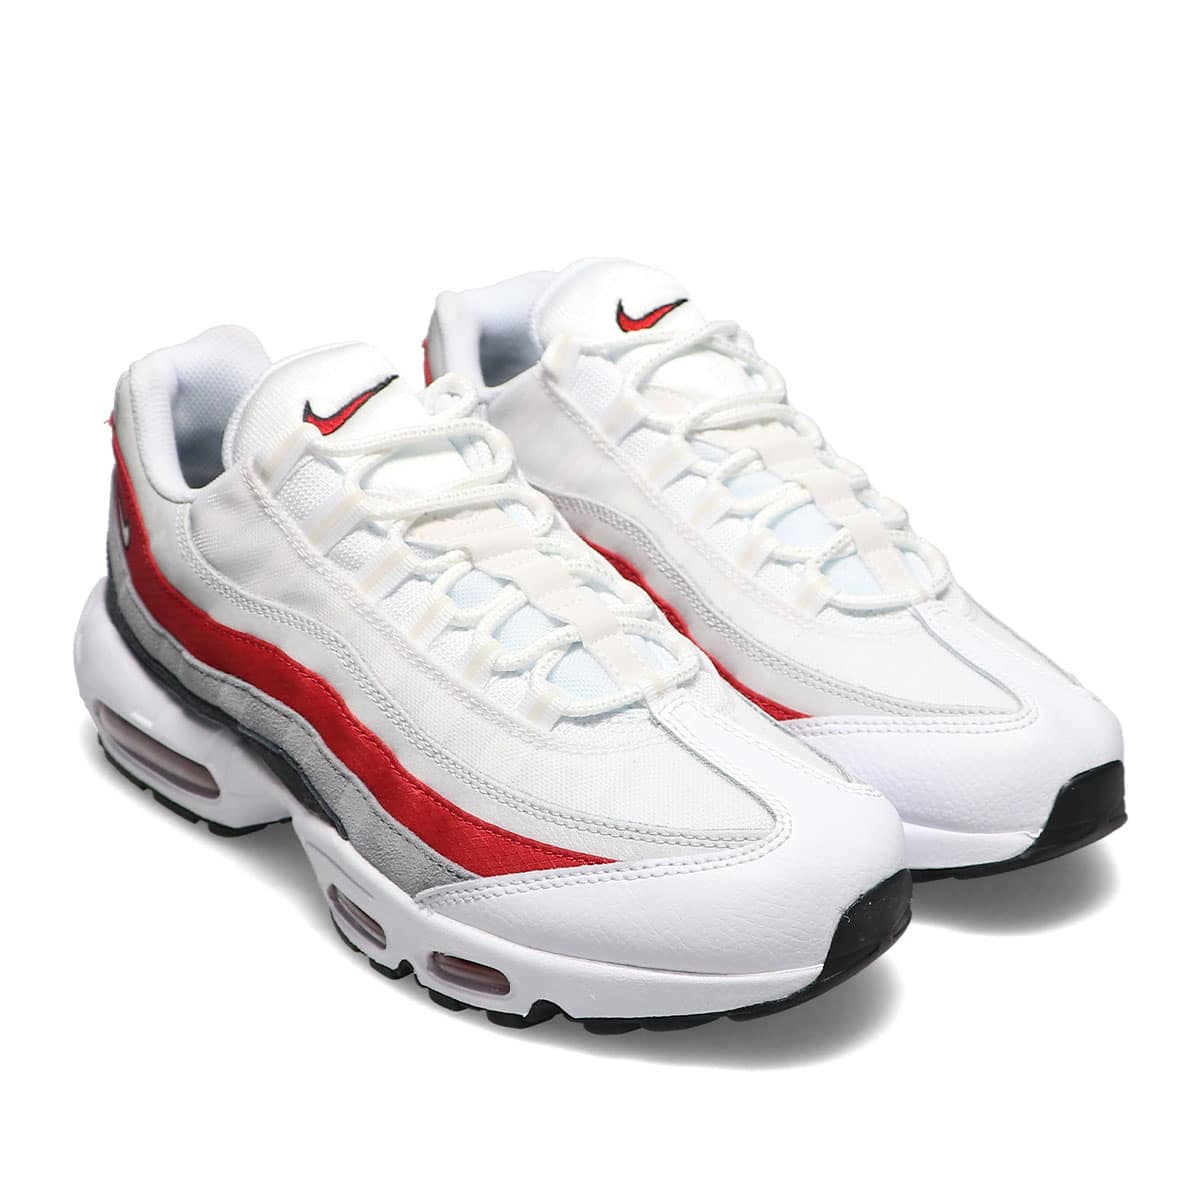 NIKE AIR MAX 95 ESSENTIAL BLACK/WHITE-VARSITY RED-PARTICLE GREY